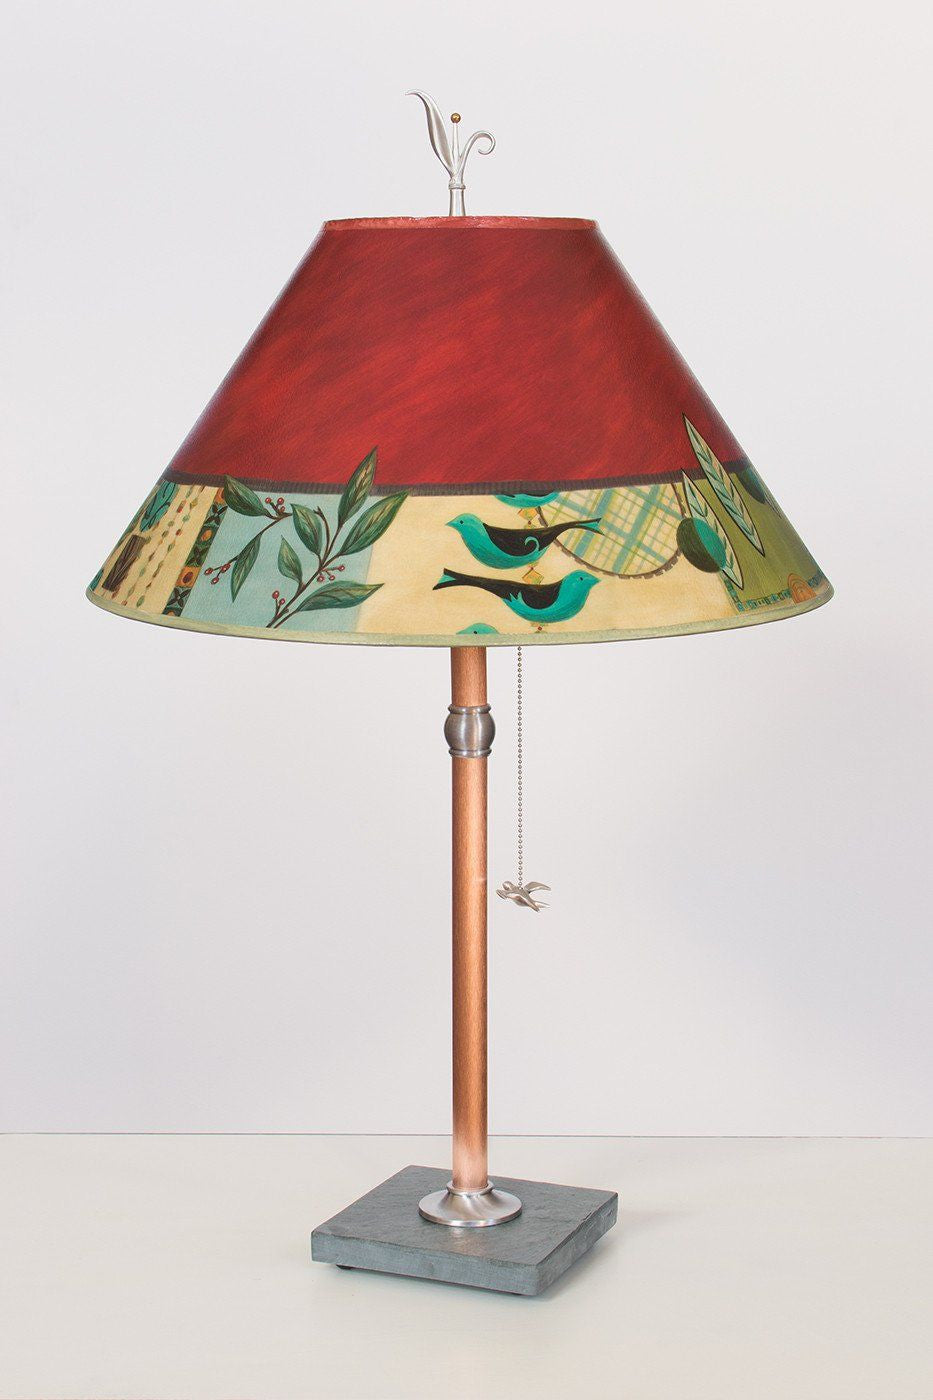 Janna Ugone & Co Table Lamps Copper Table Lamp with Large Conical Shade in New Capri